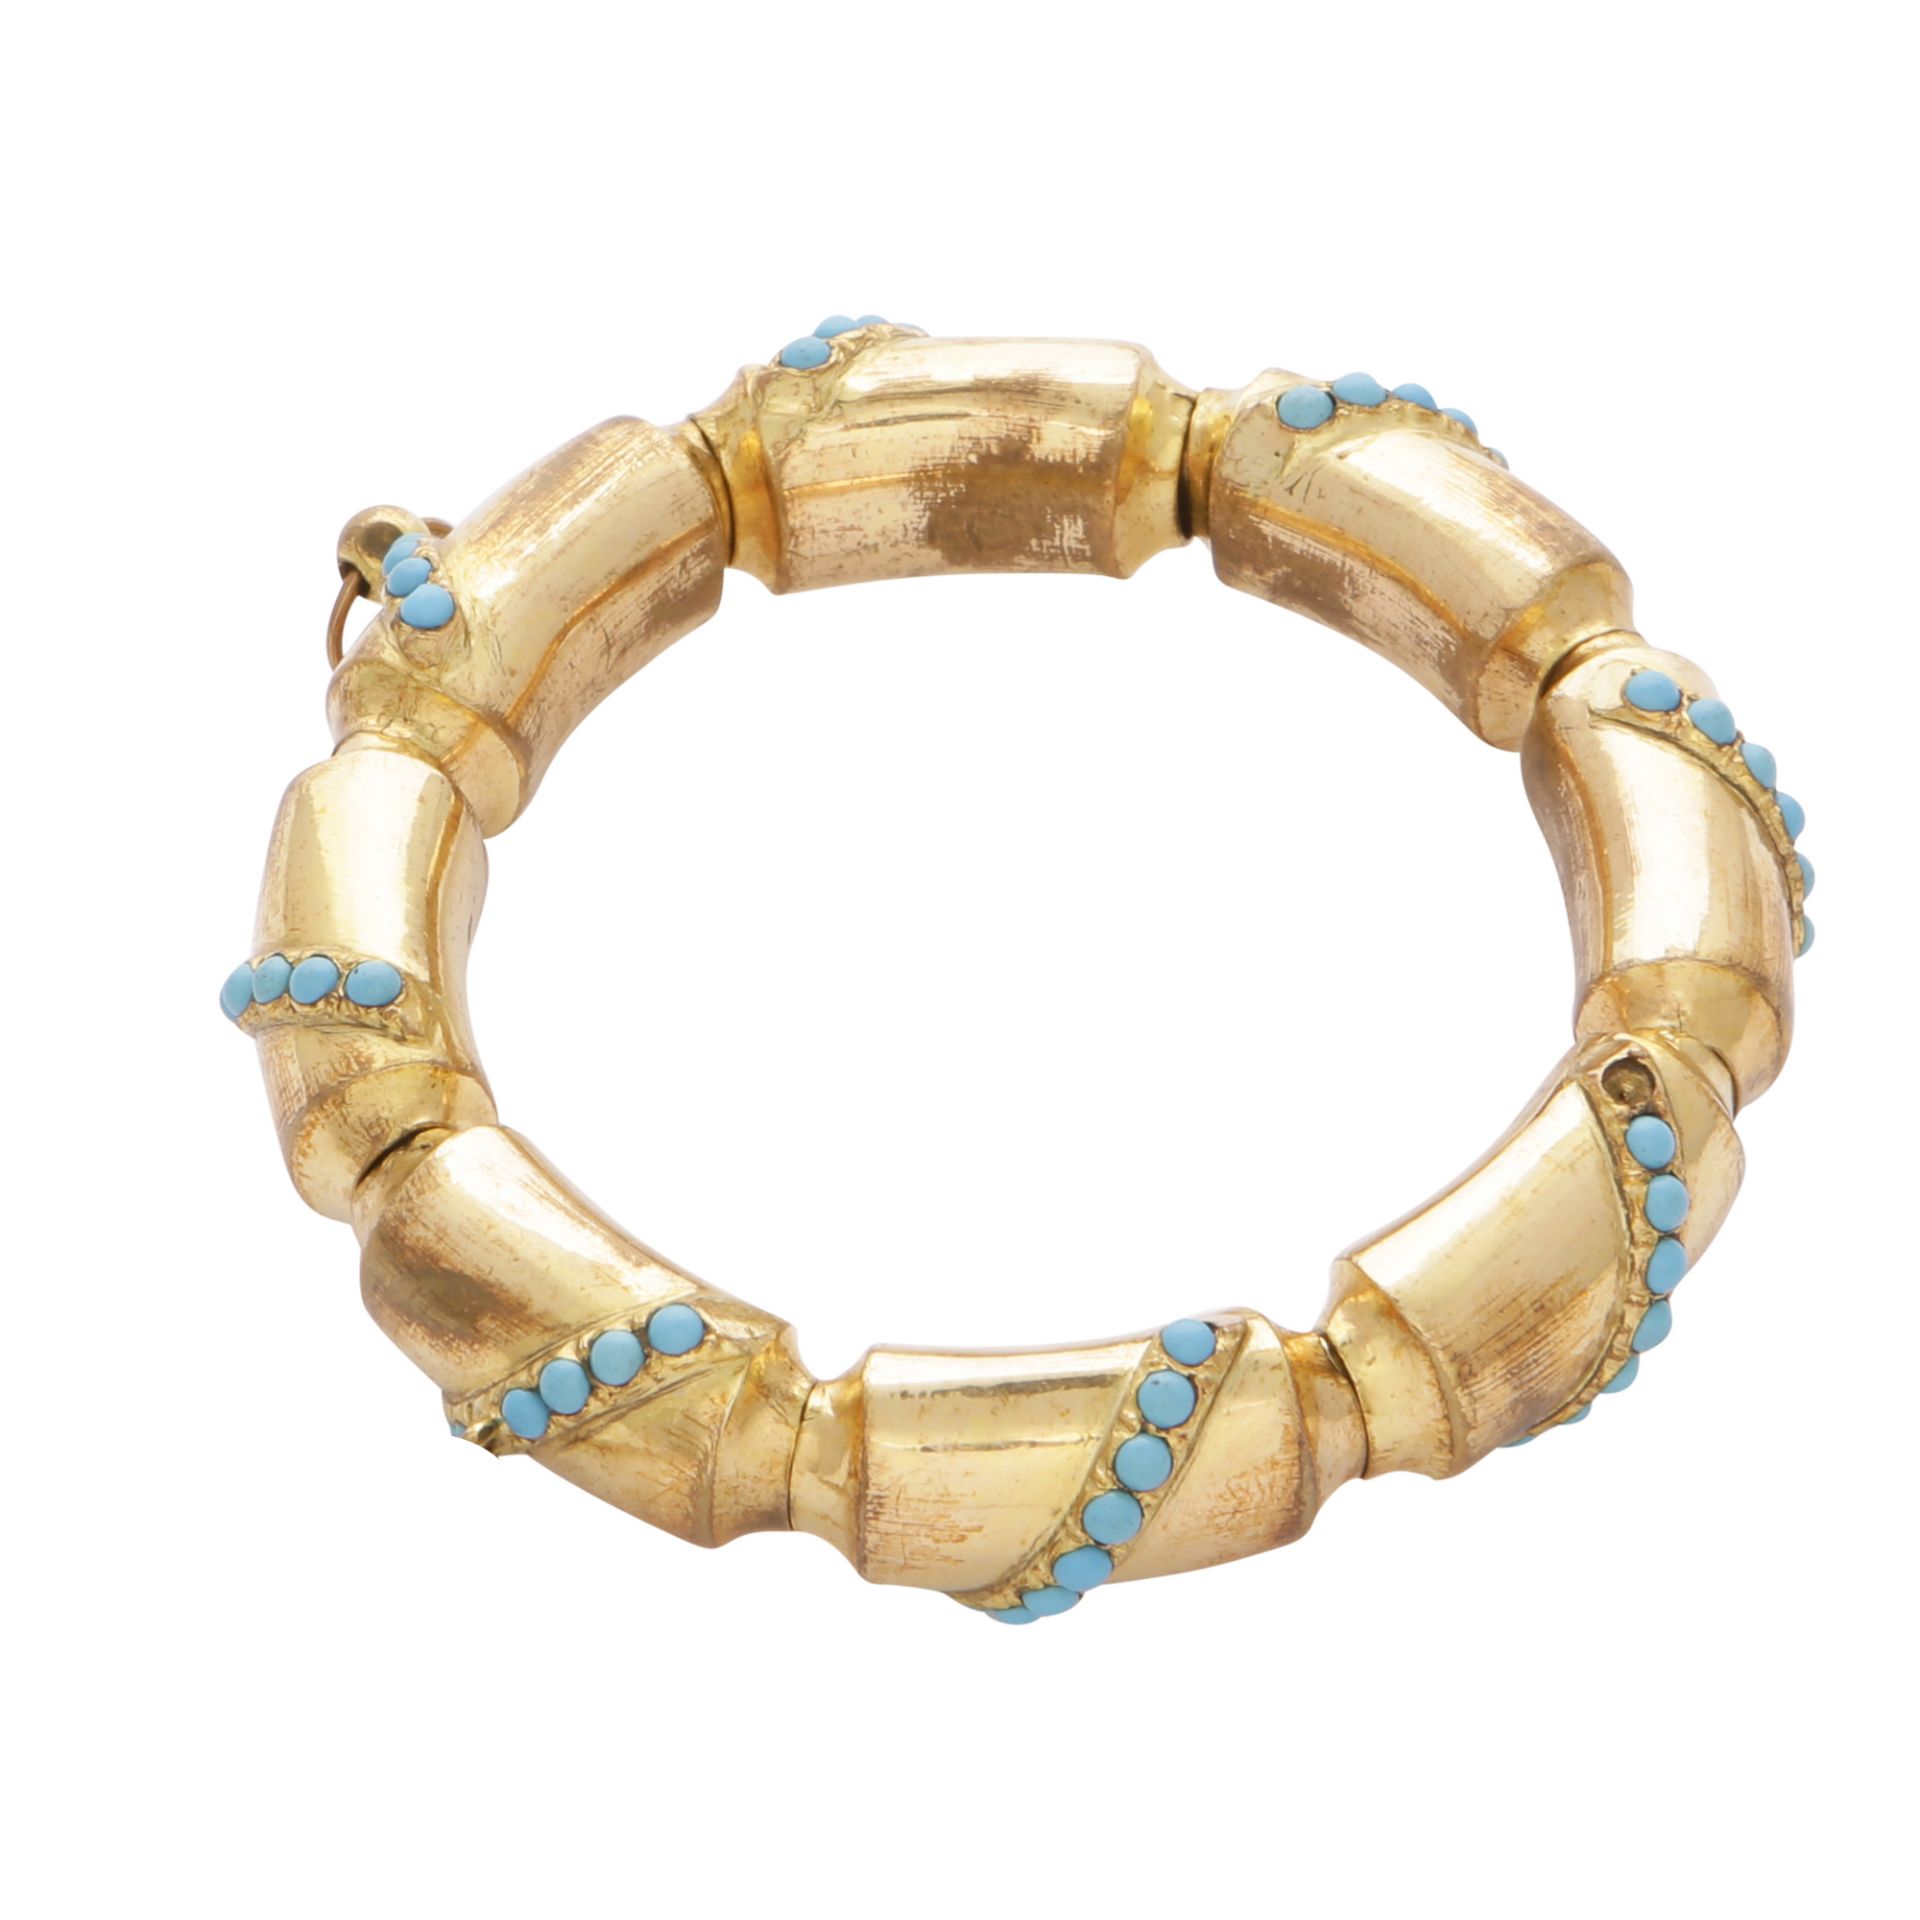 AN ANTIQUE TURQUOISE BRACELET, 19TH CENTURY the extending links each jewelled with a diagonal row of